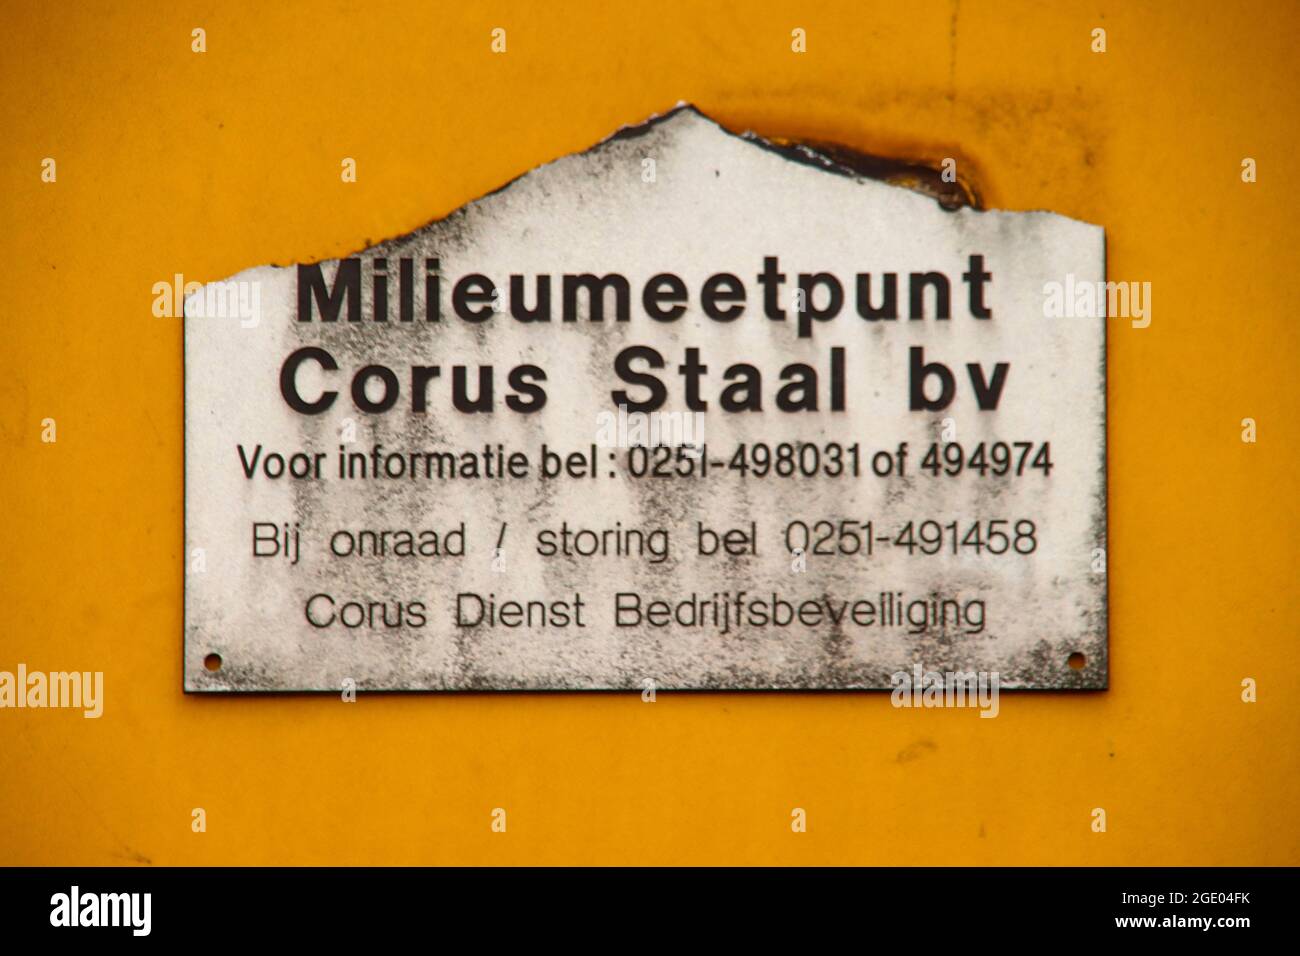 Old sign of the environment measurement point (Milieumeetpunt) of Tata (corus) steel in IJmuiden the Netherlands Stock Photo